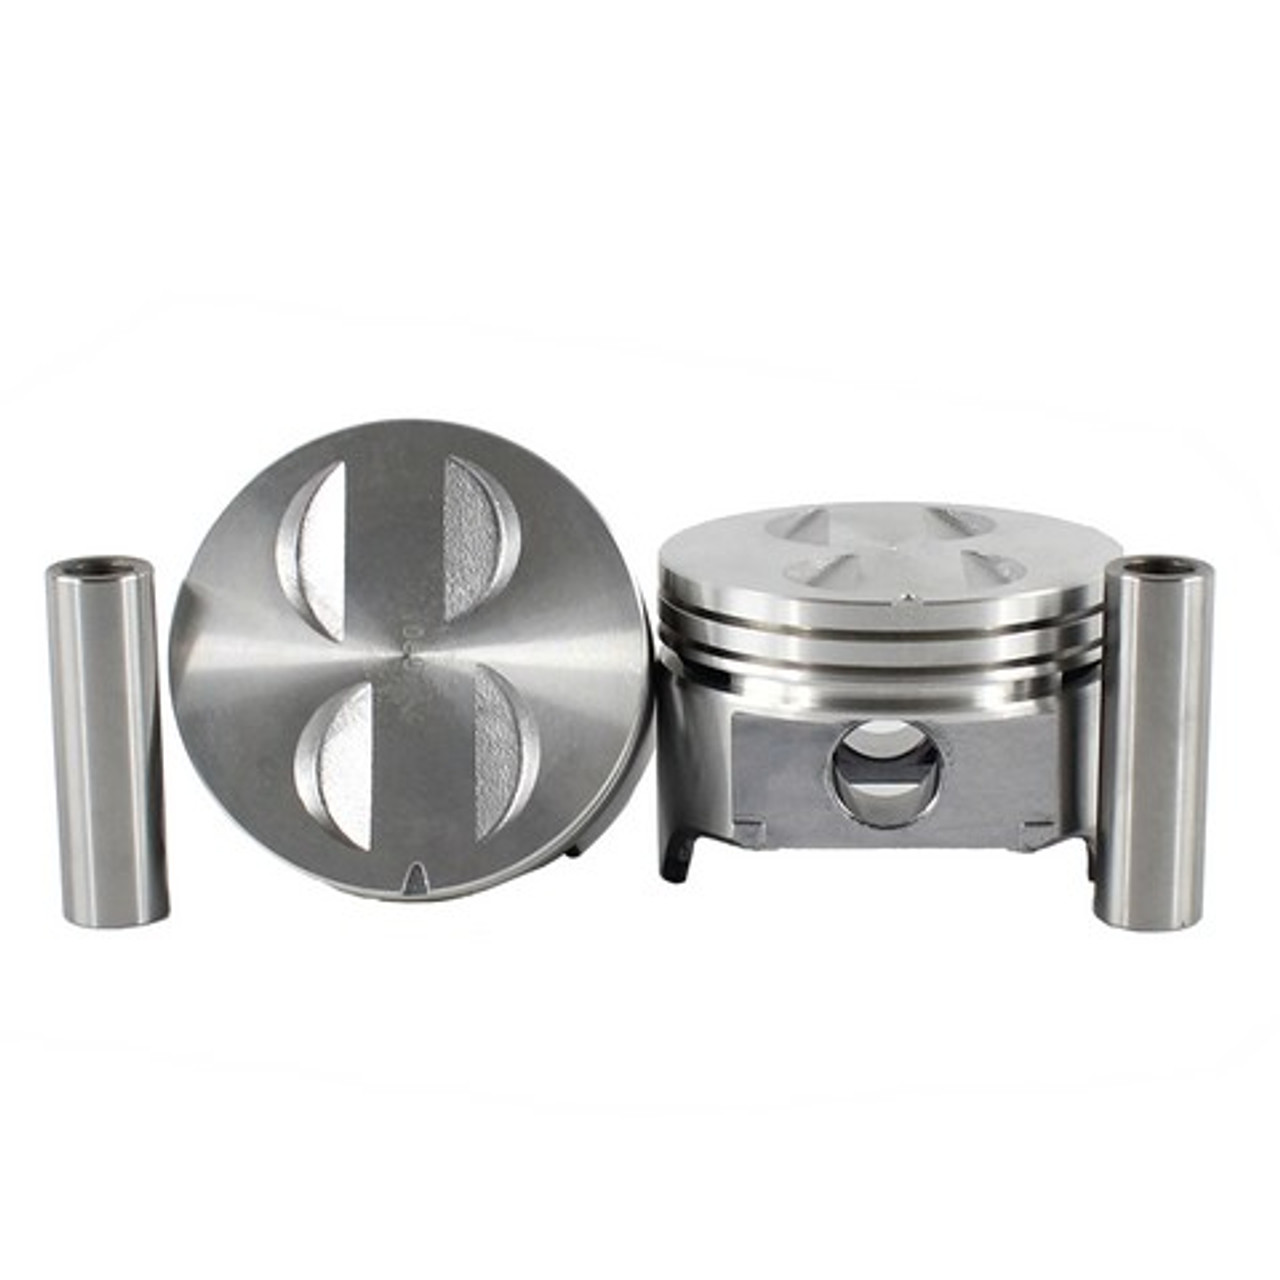 Piston Set 5.0L 1991 Ford Country Squire - P4112.9